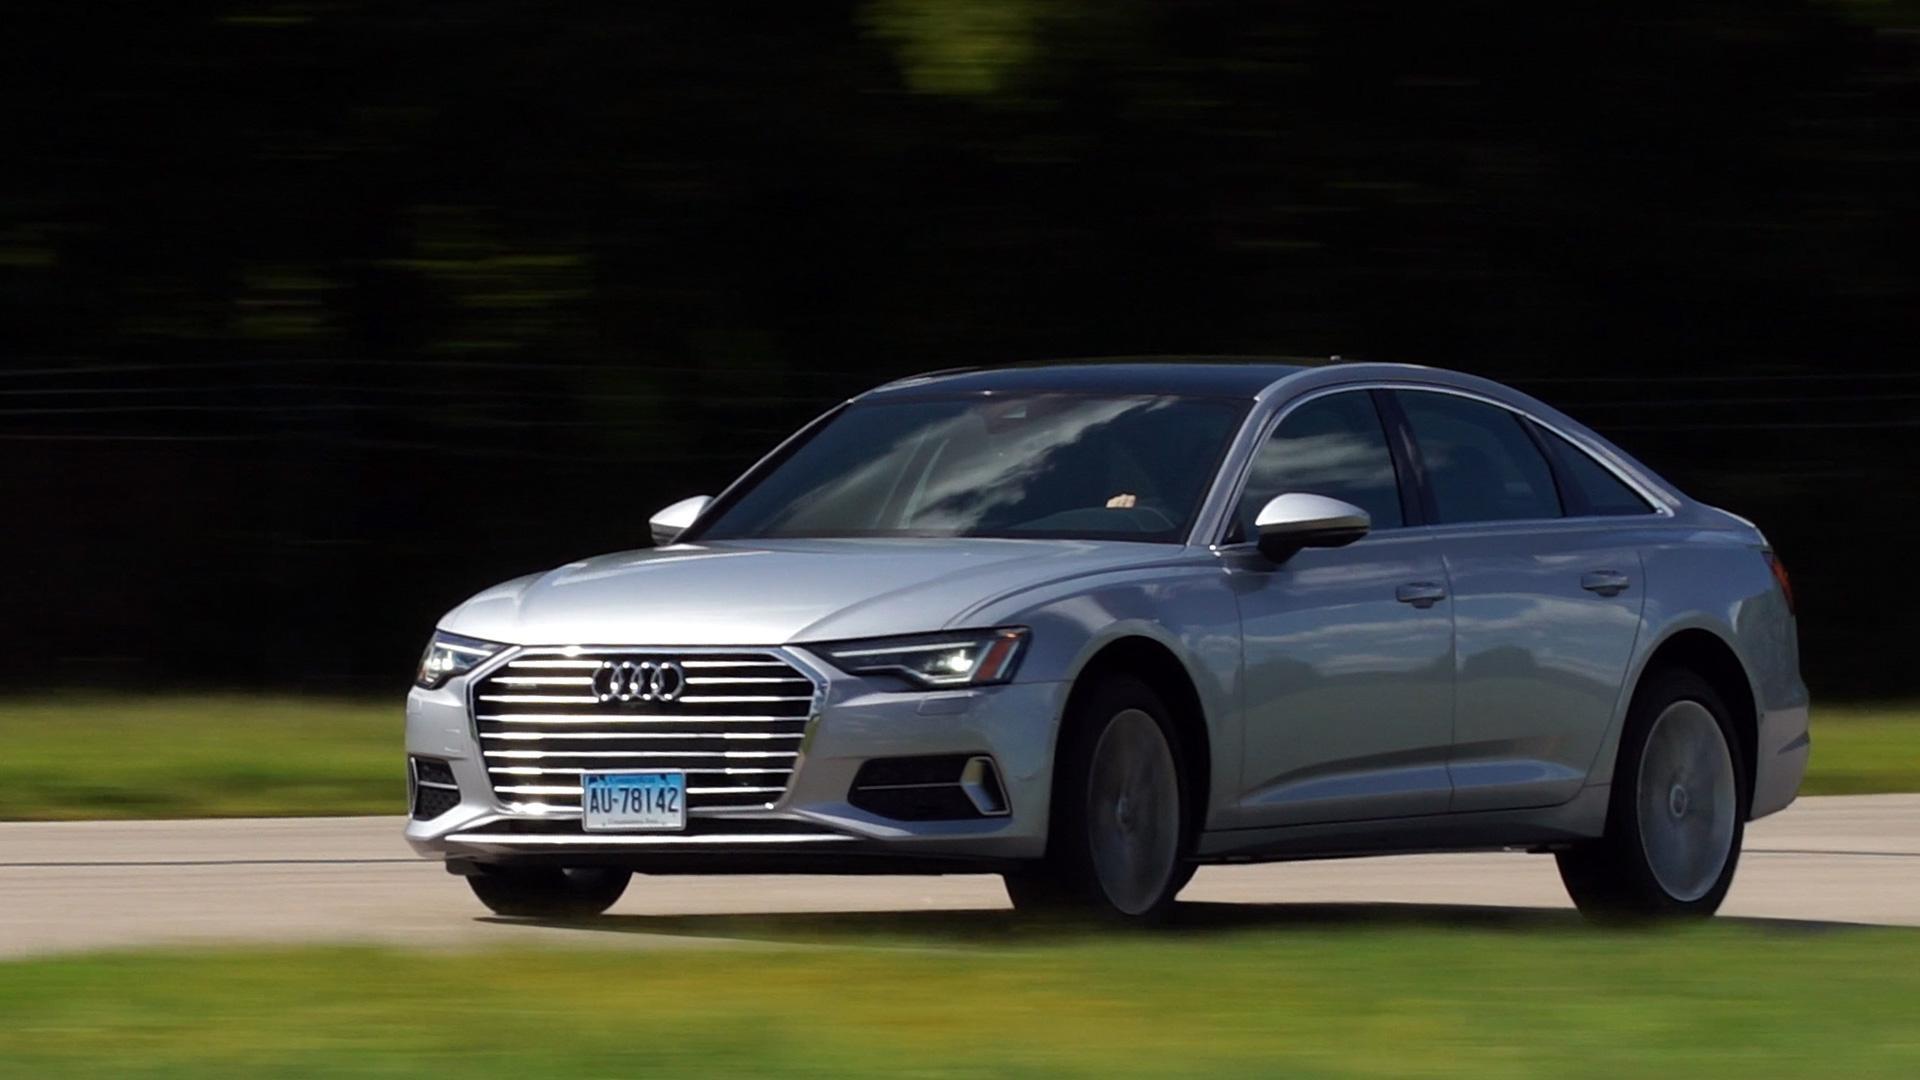 2024 Audi A6 Price, Reviews, Pictures & More